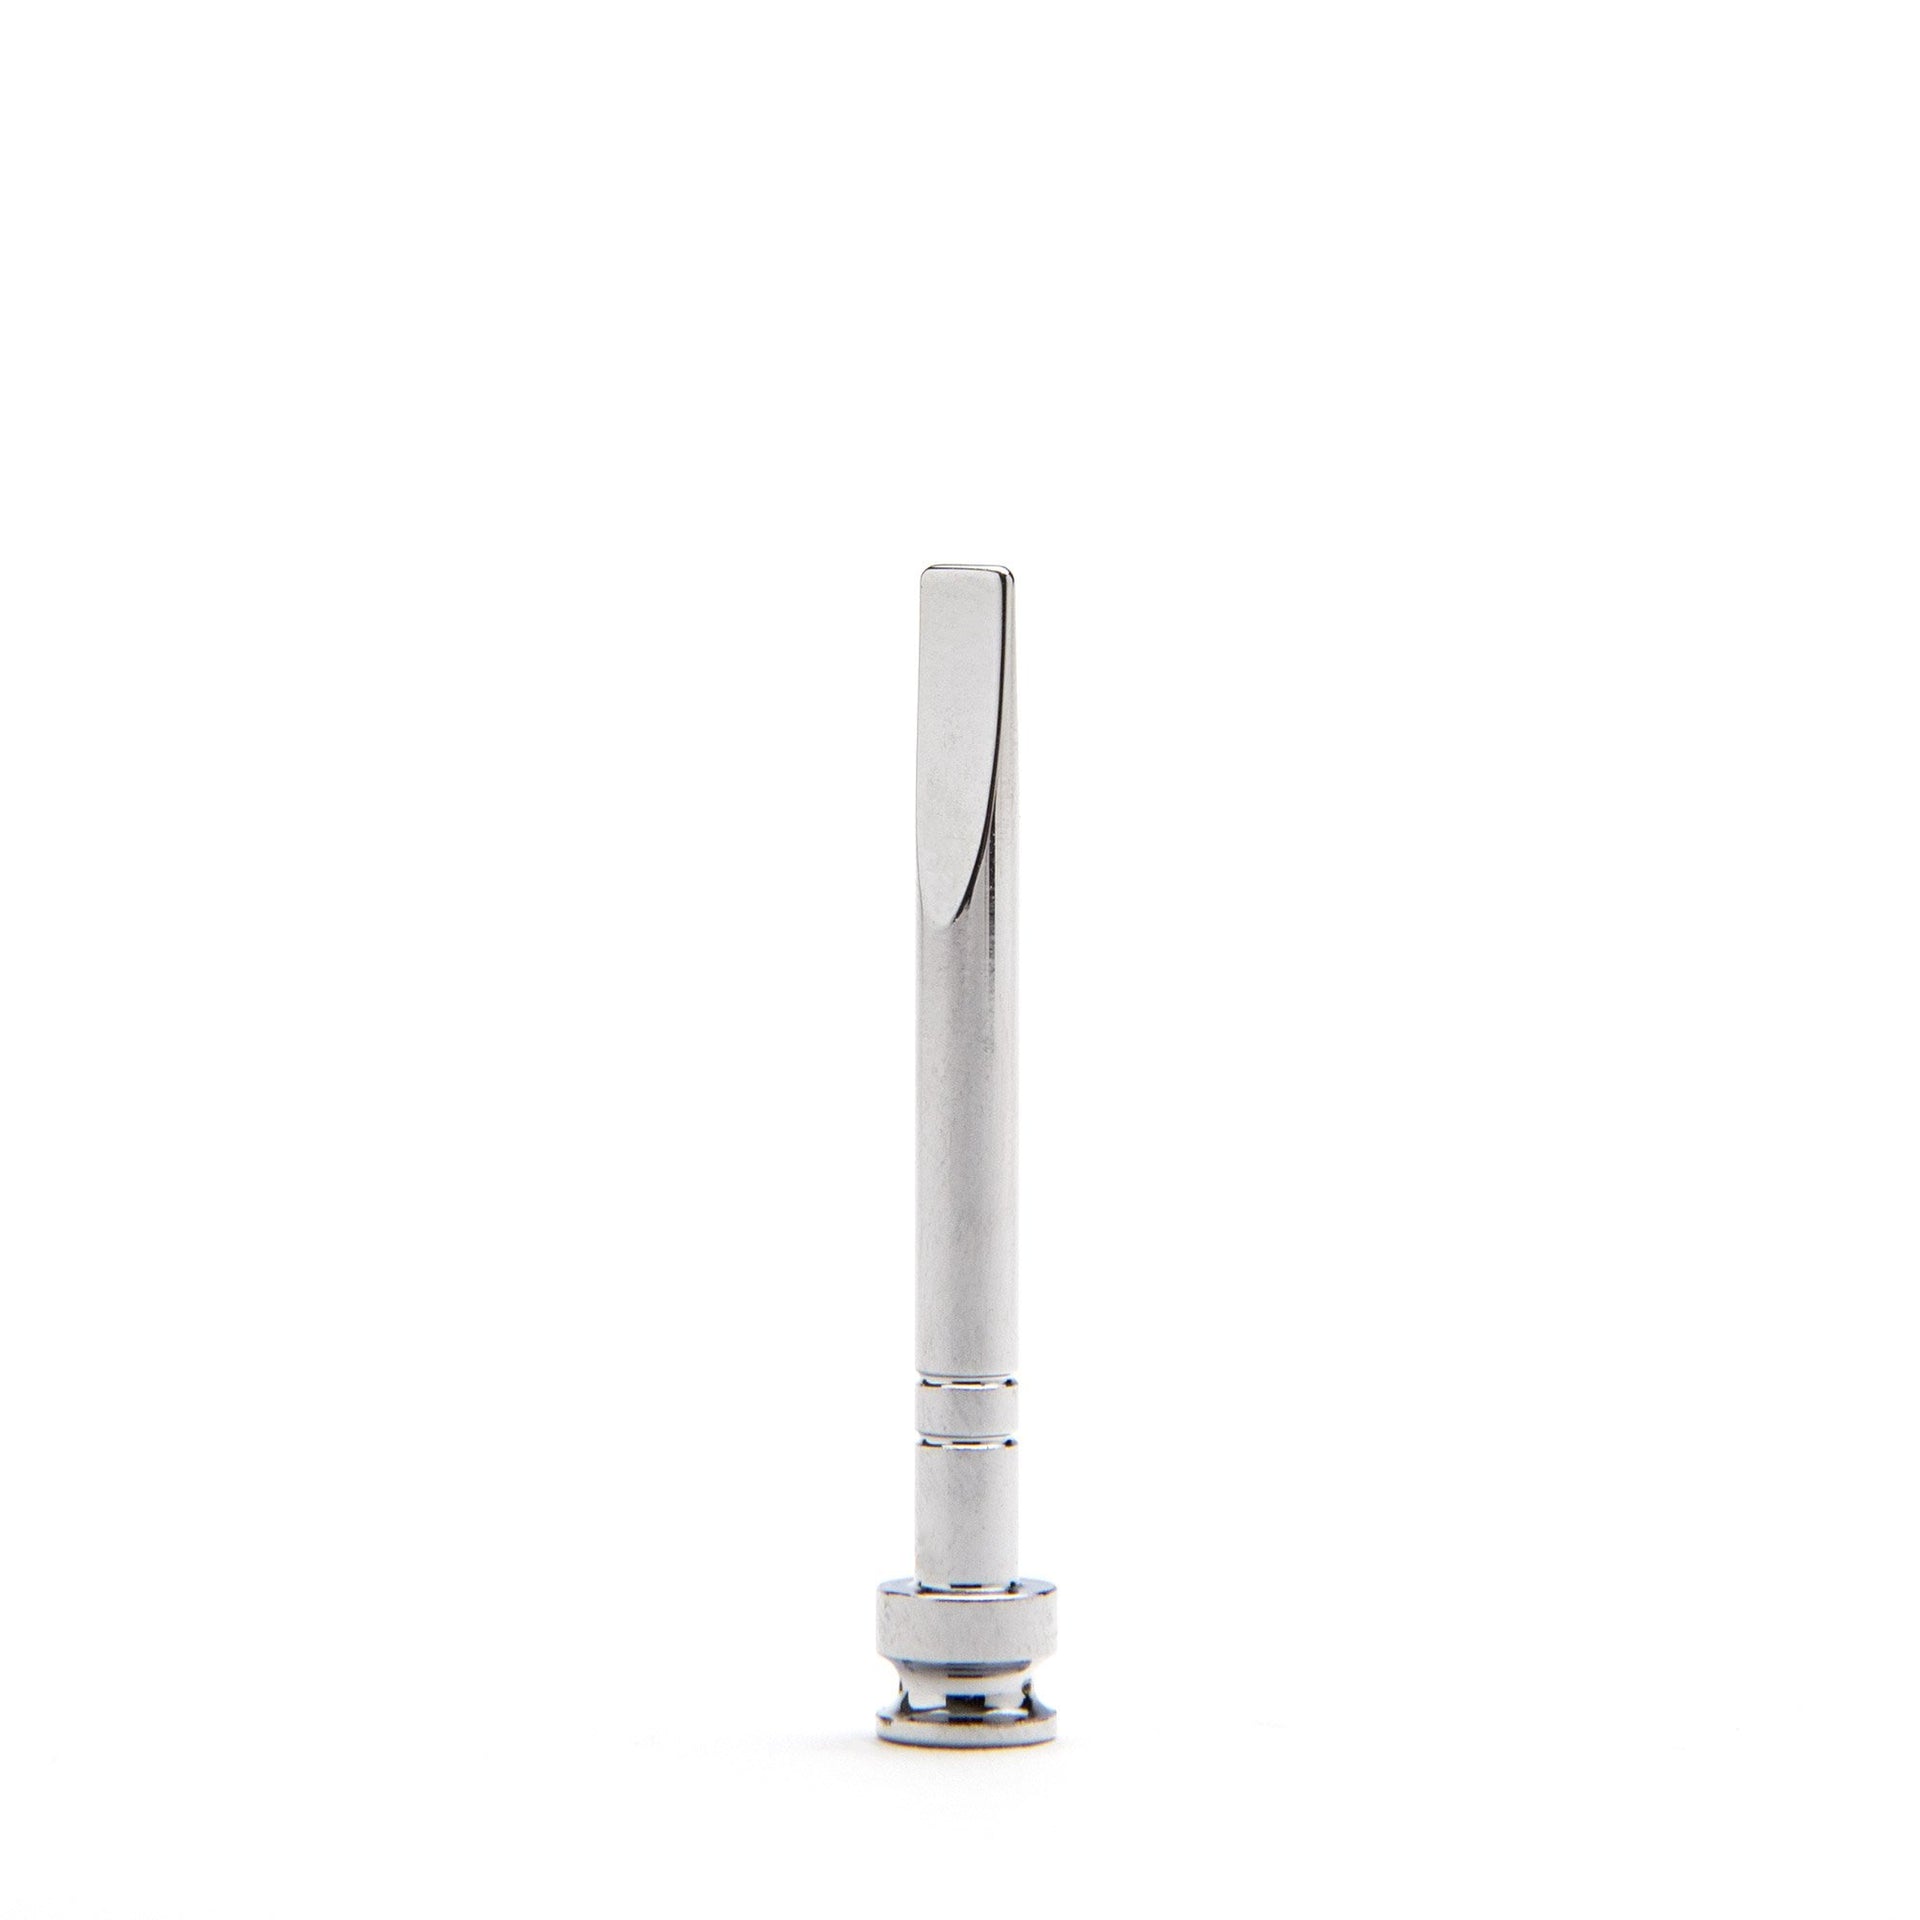 LINX Gaia Magnetic Tool | Vaporizer Parts & Accessories | 420 Science